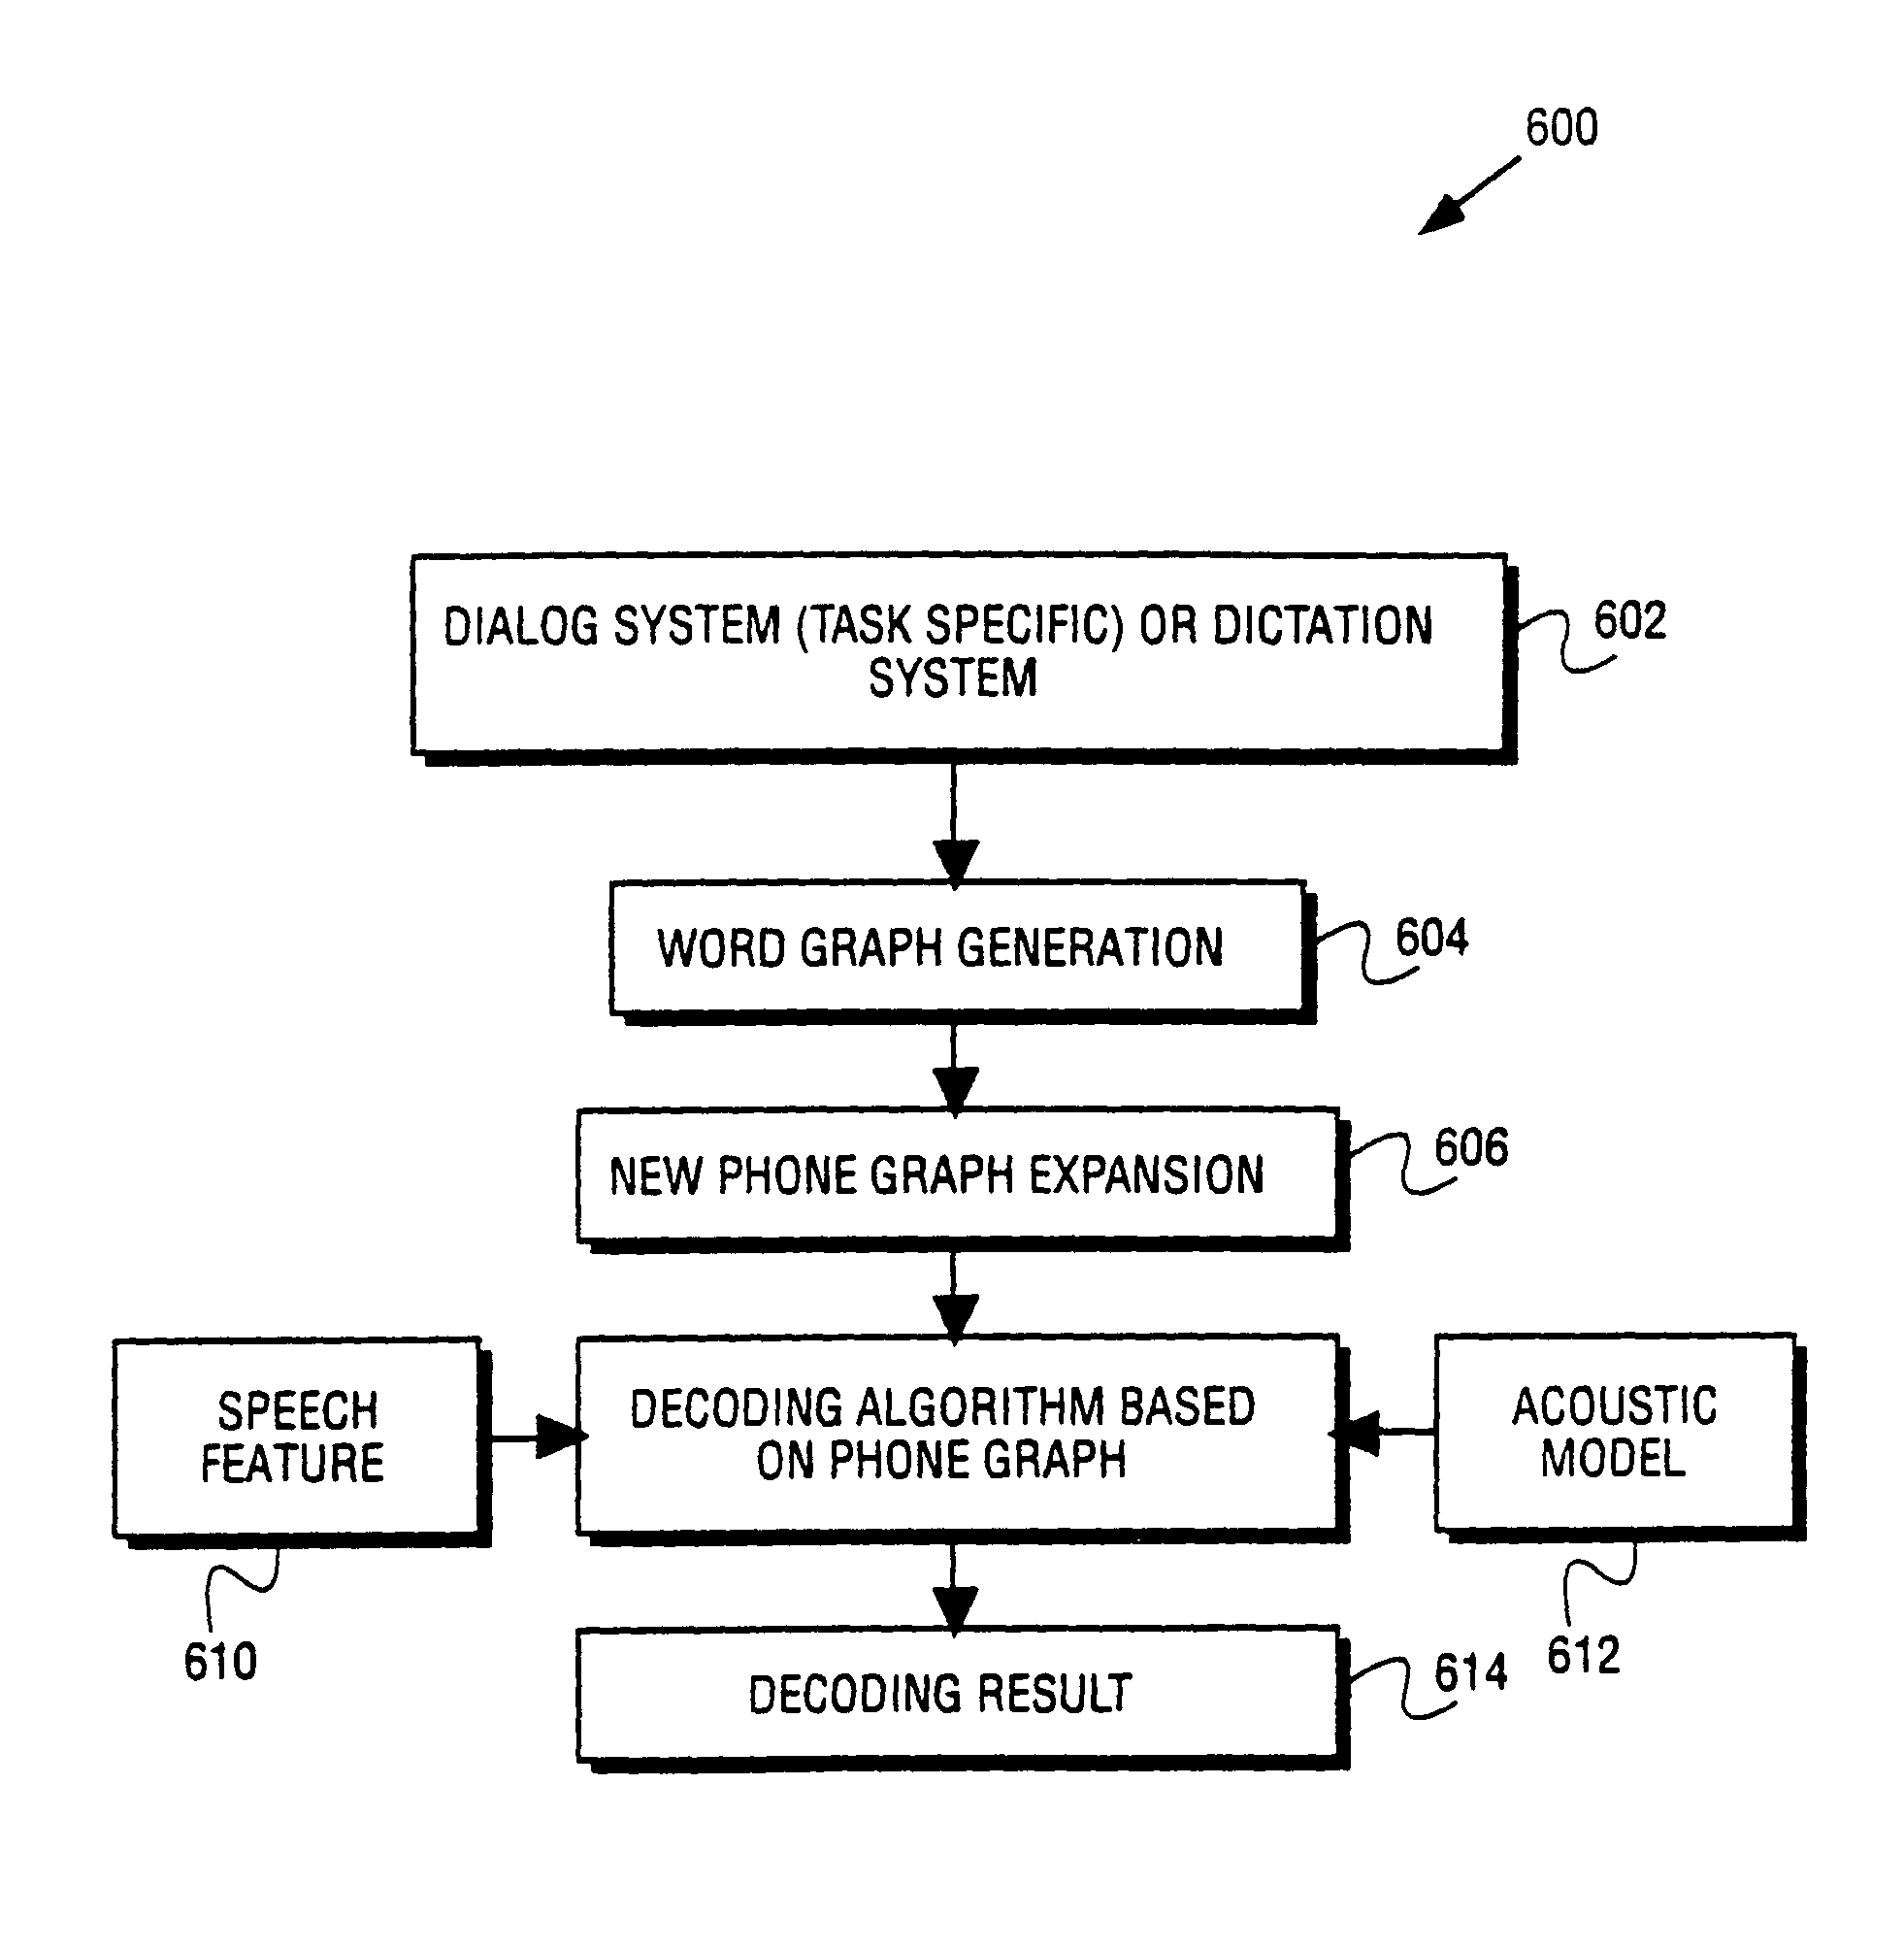 Method and system for expanding a word graph to a phone graph based on a cross-word acoustical model to improve continuous speech recognition